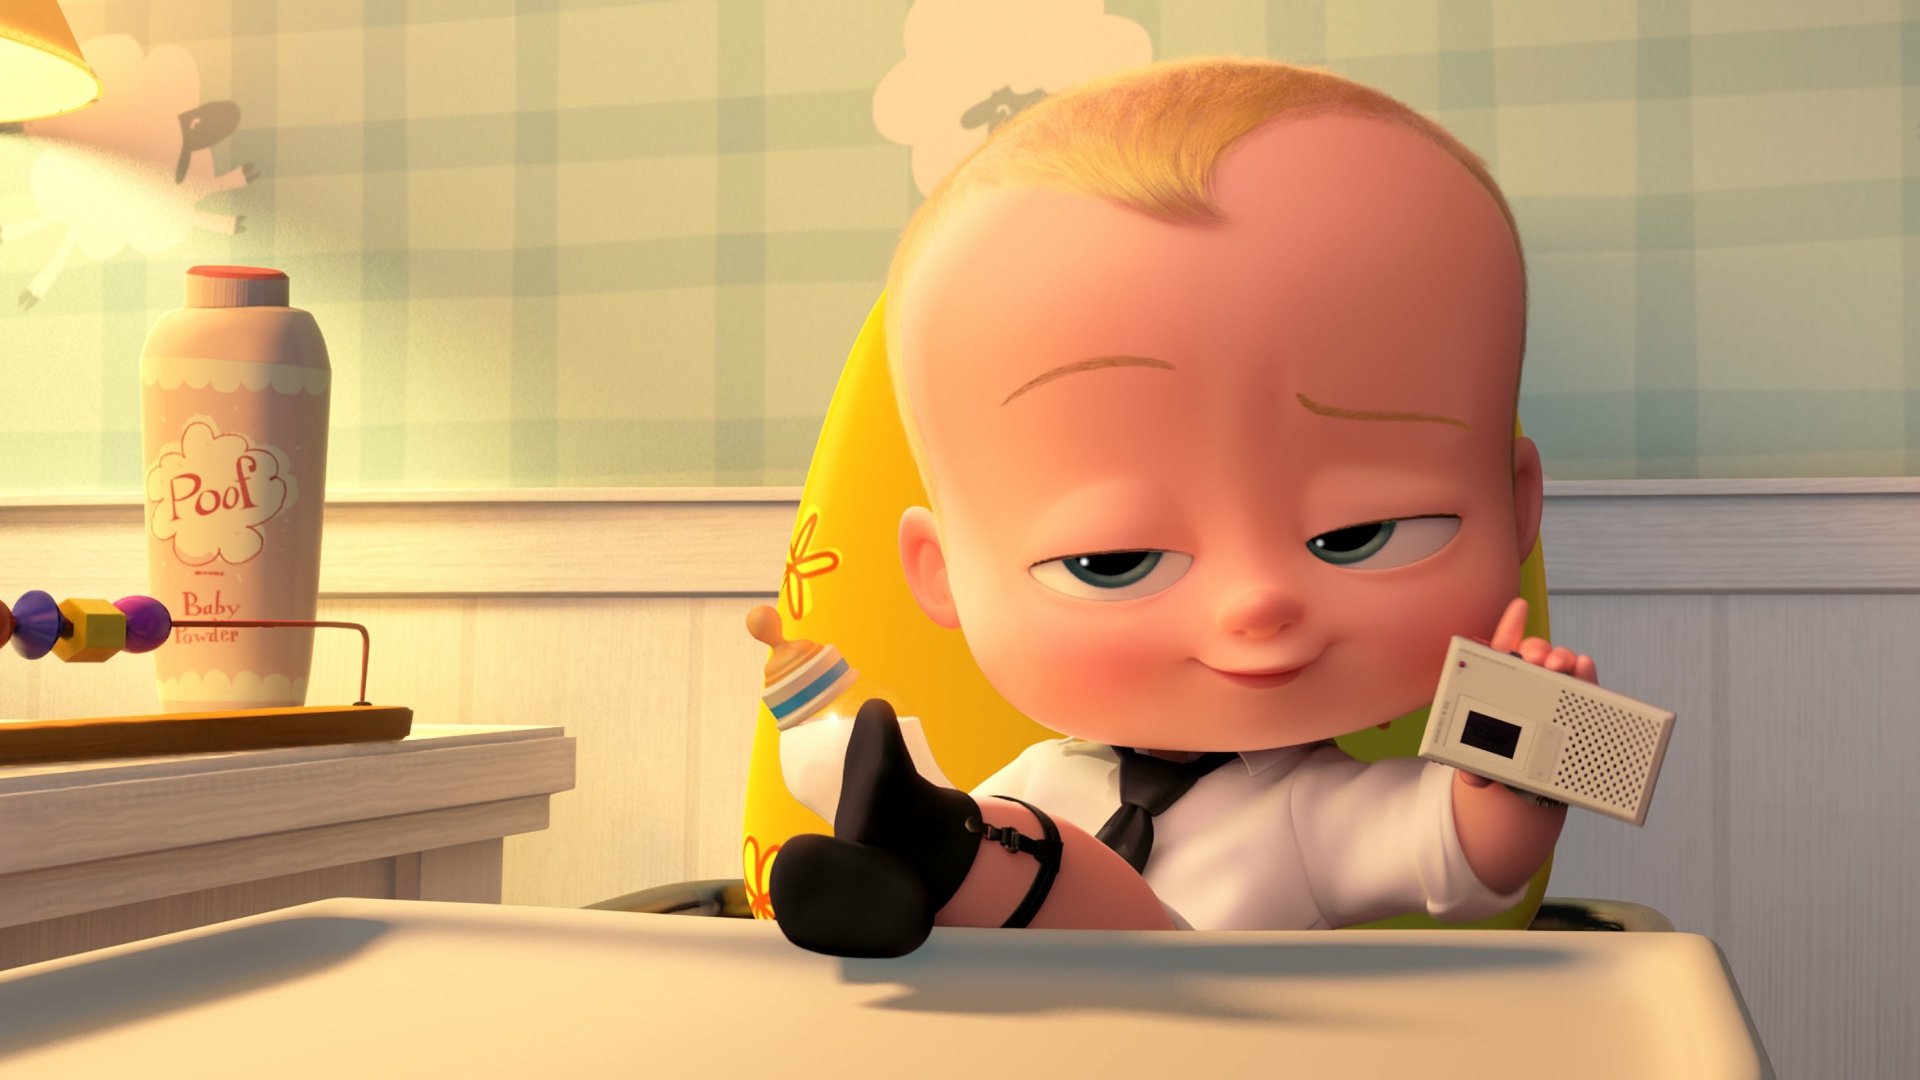 the boss baby 2 full movie sub indo download